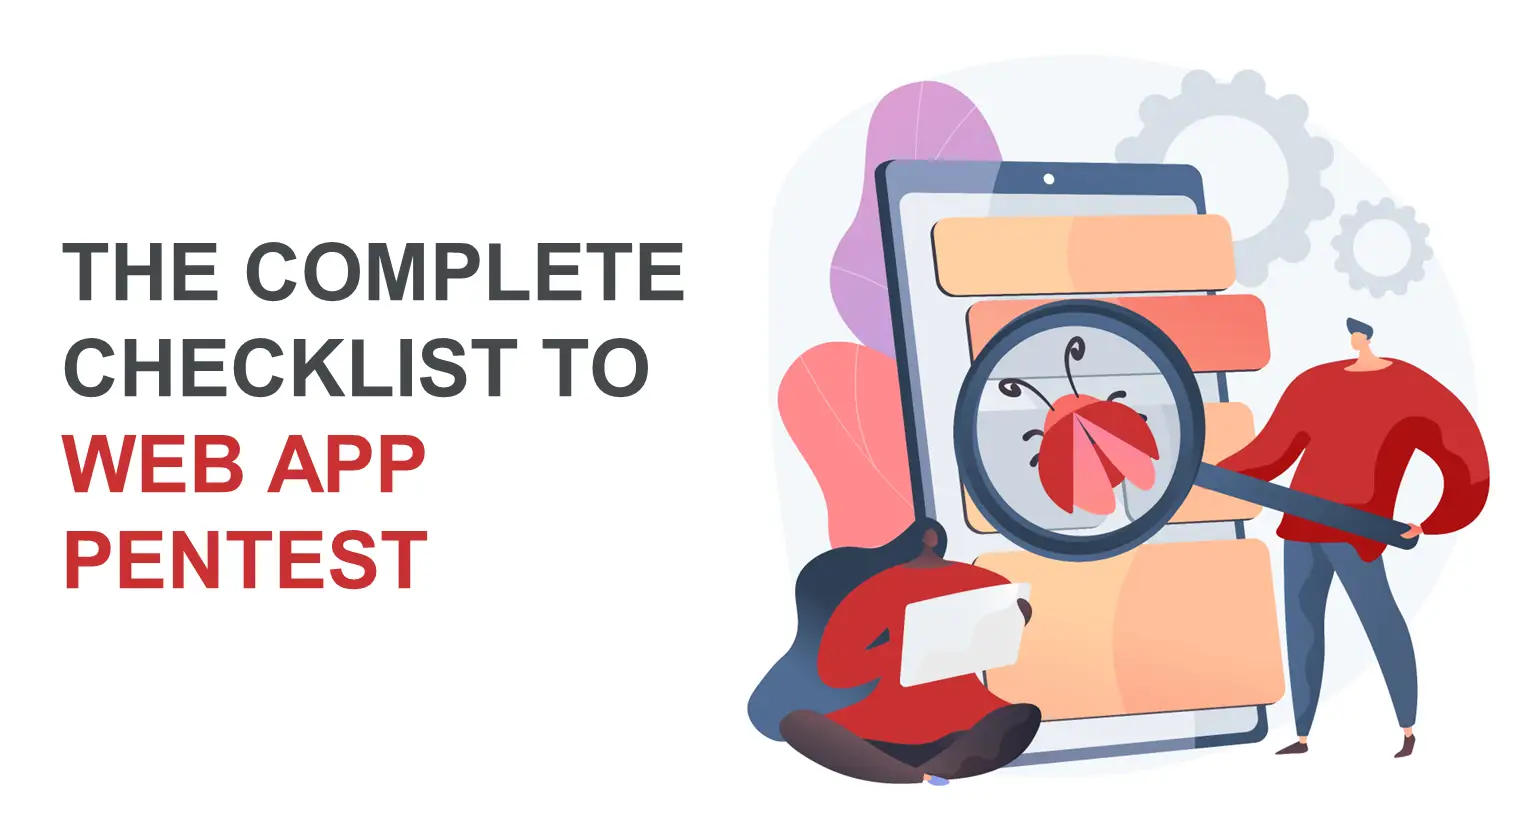 The Complete Checklist to Web App Pentest